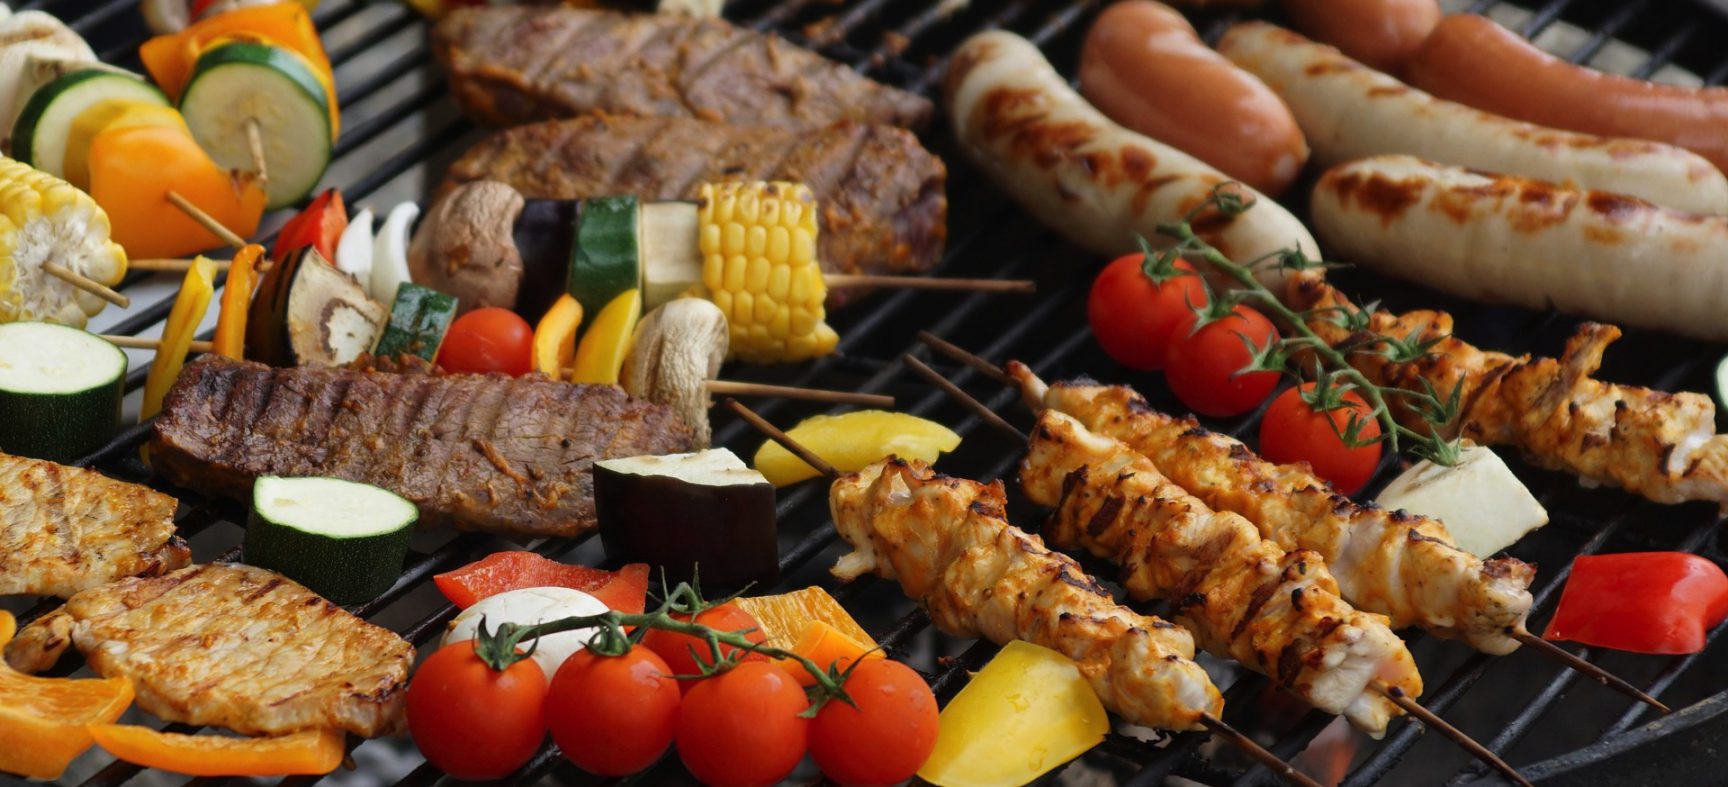 Getting your grill ready for a backyard barbecue